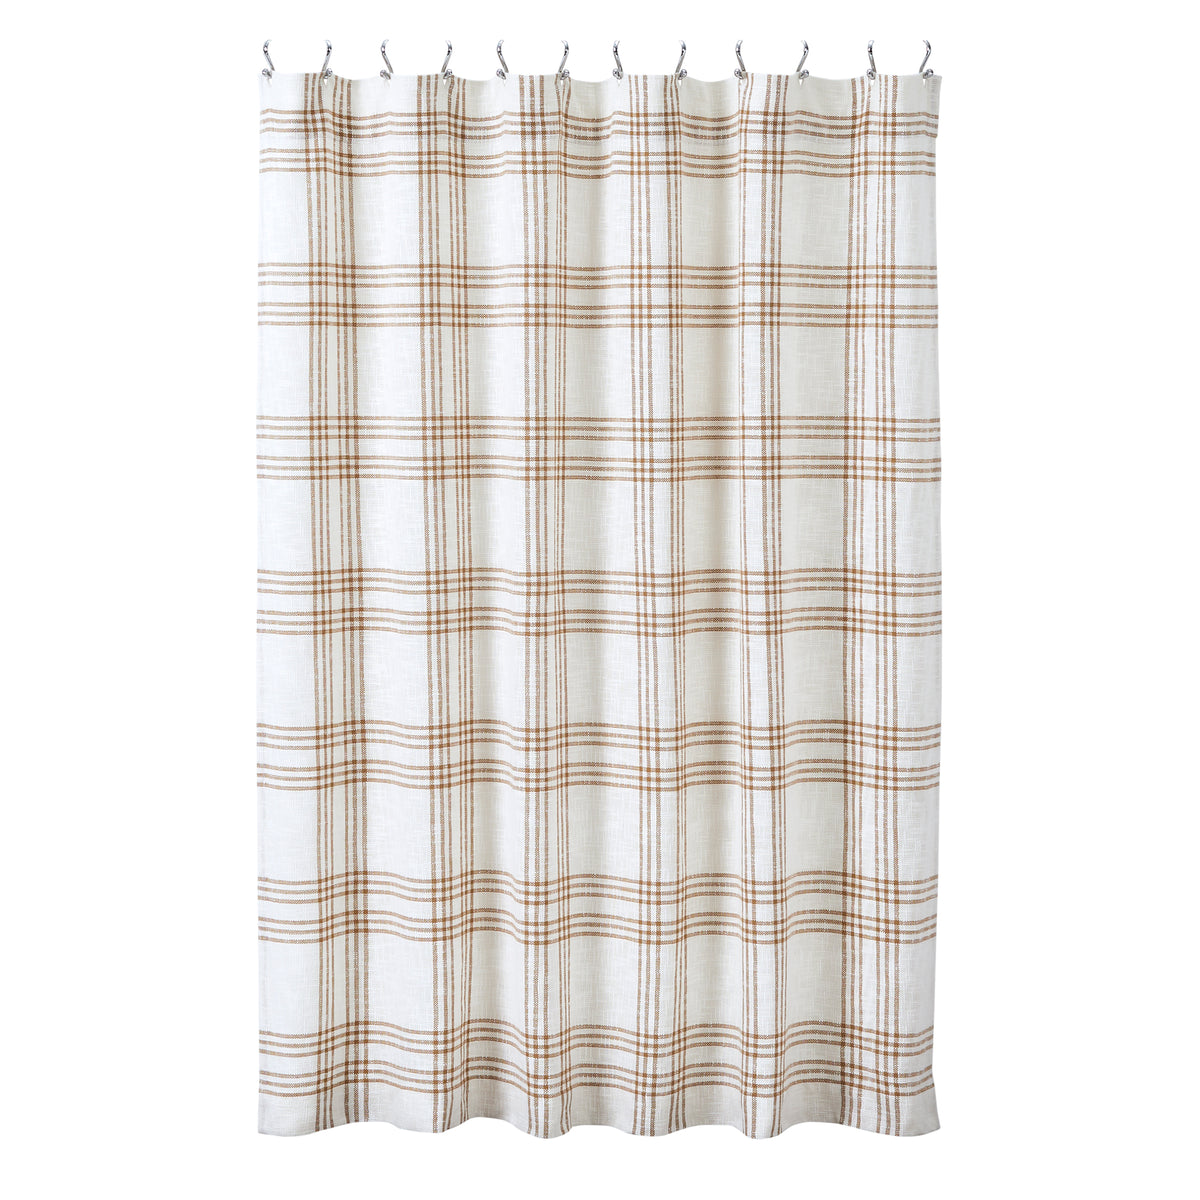 April & Olive Wheat Plaid Shower Curtain 72x72 By VHC Brands